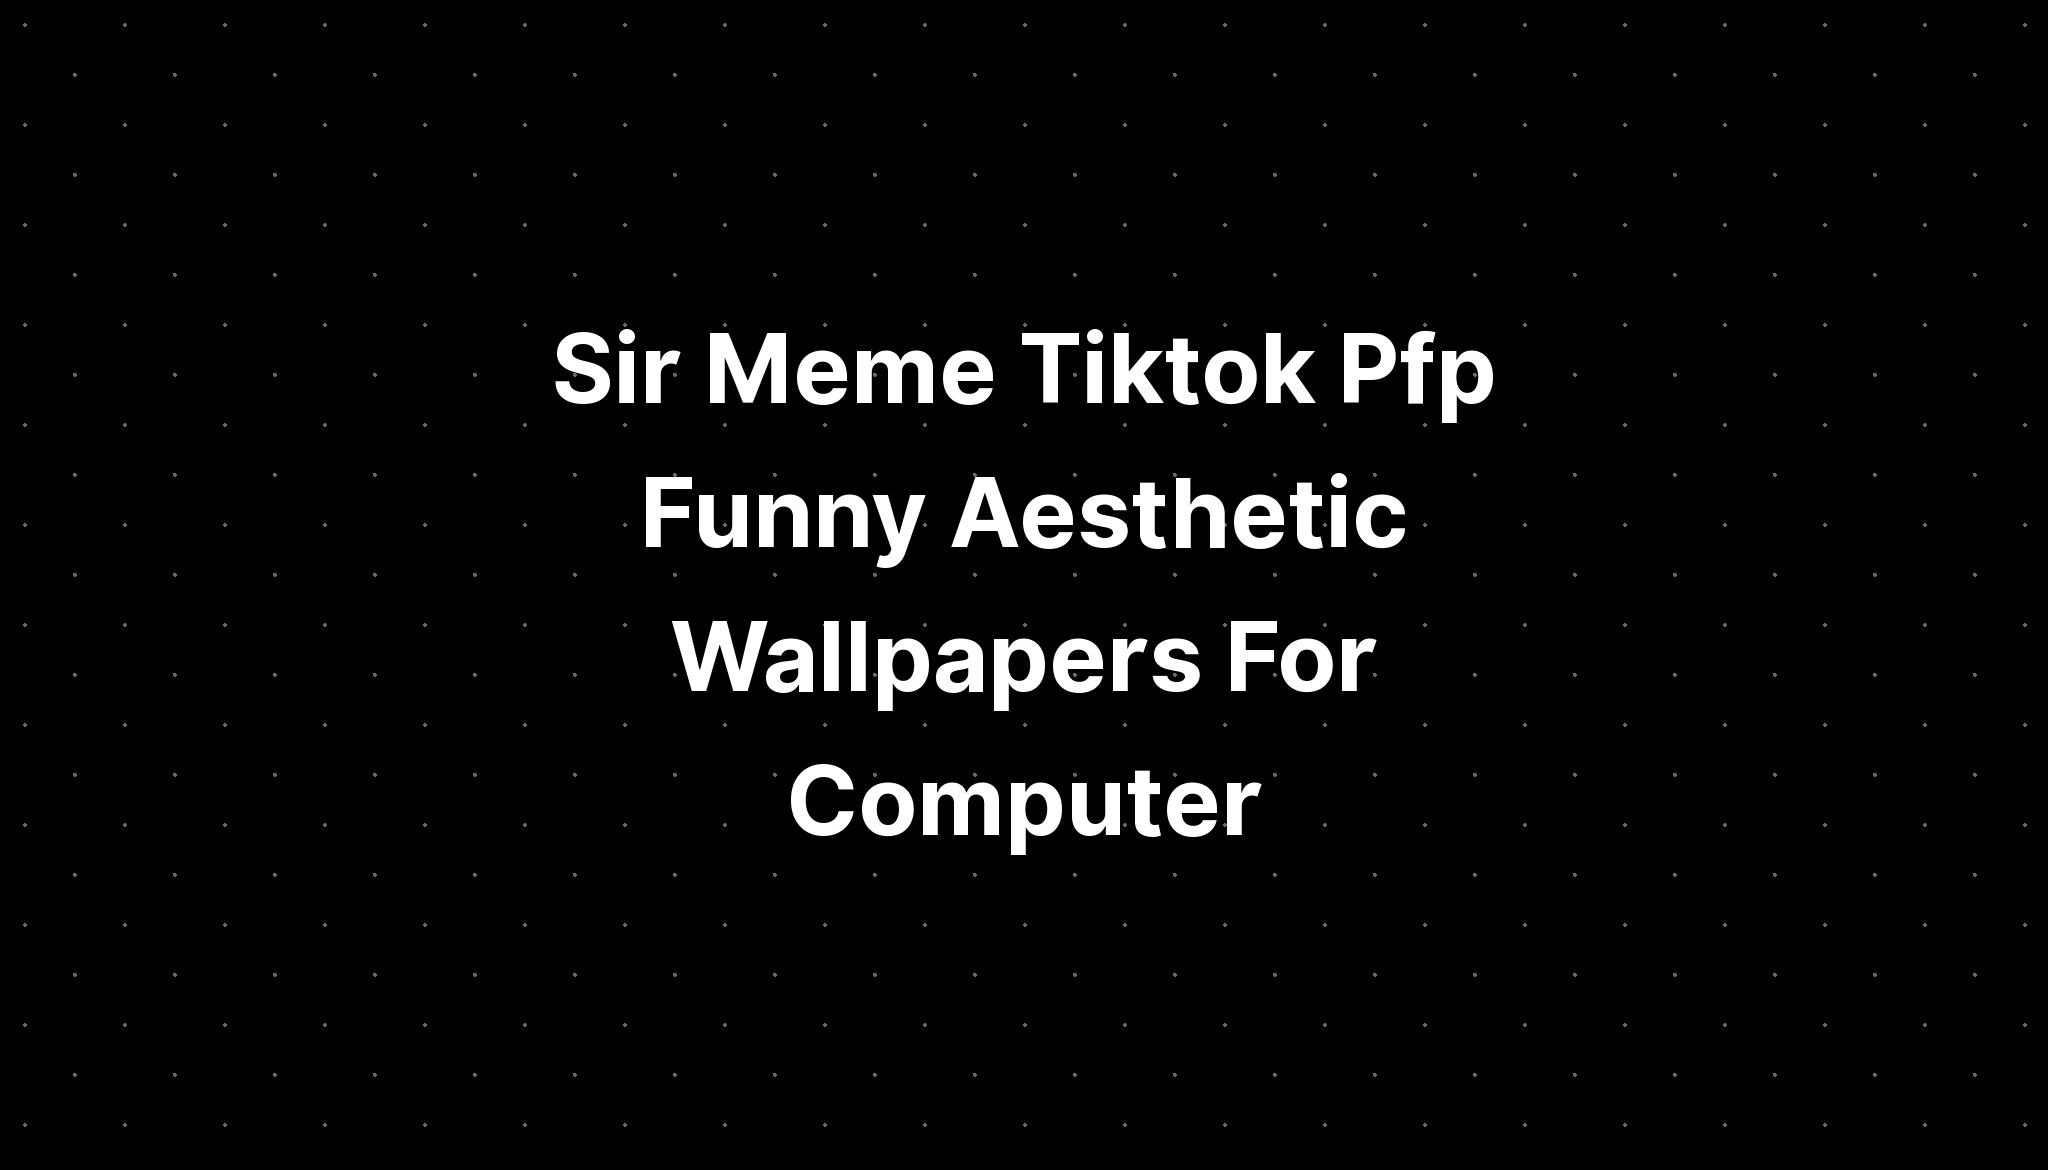 Sir Meme Tiktok Pfp Funny Aesthetic Wallpapers For Computer Imagesee